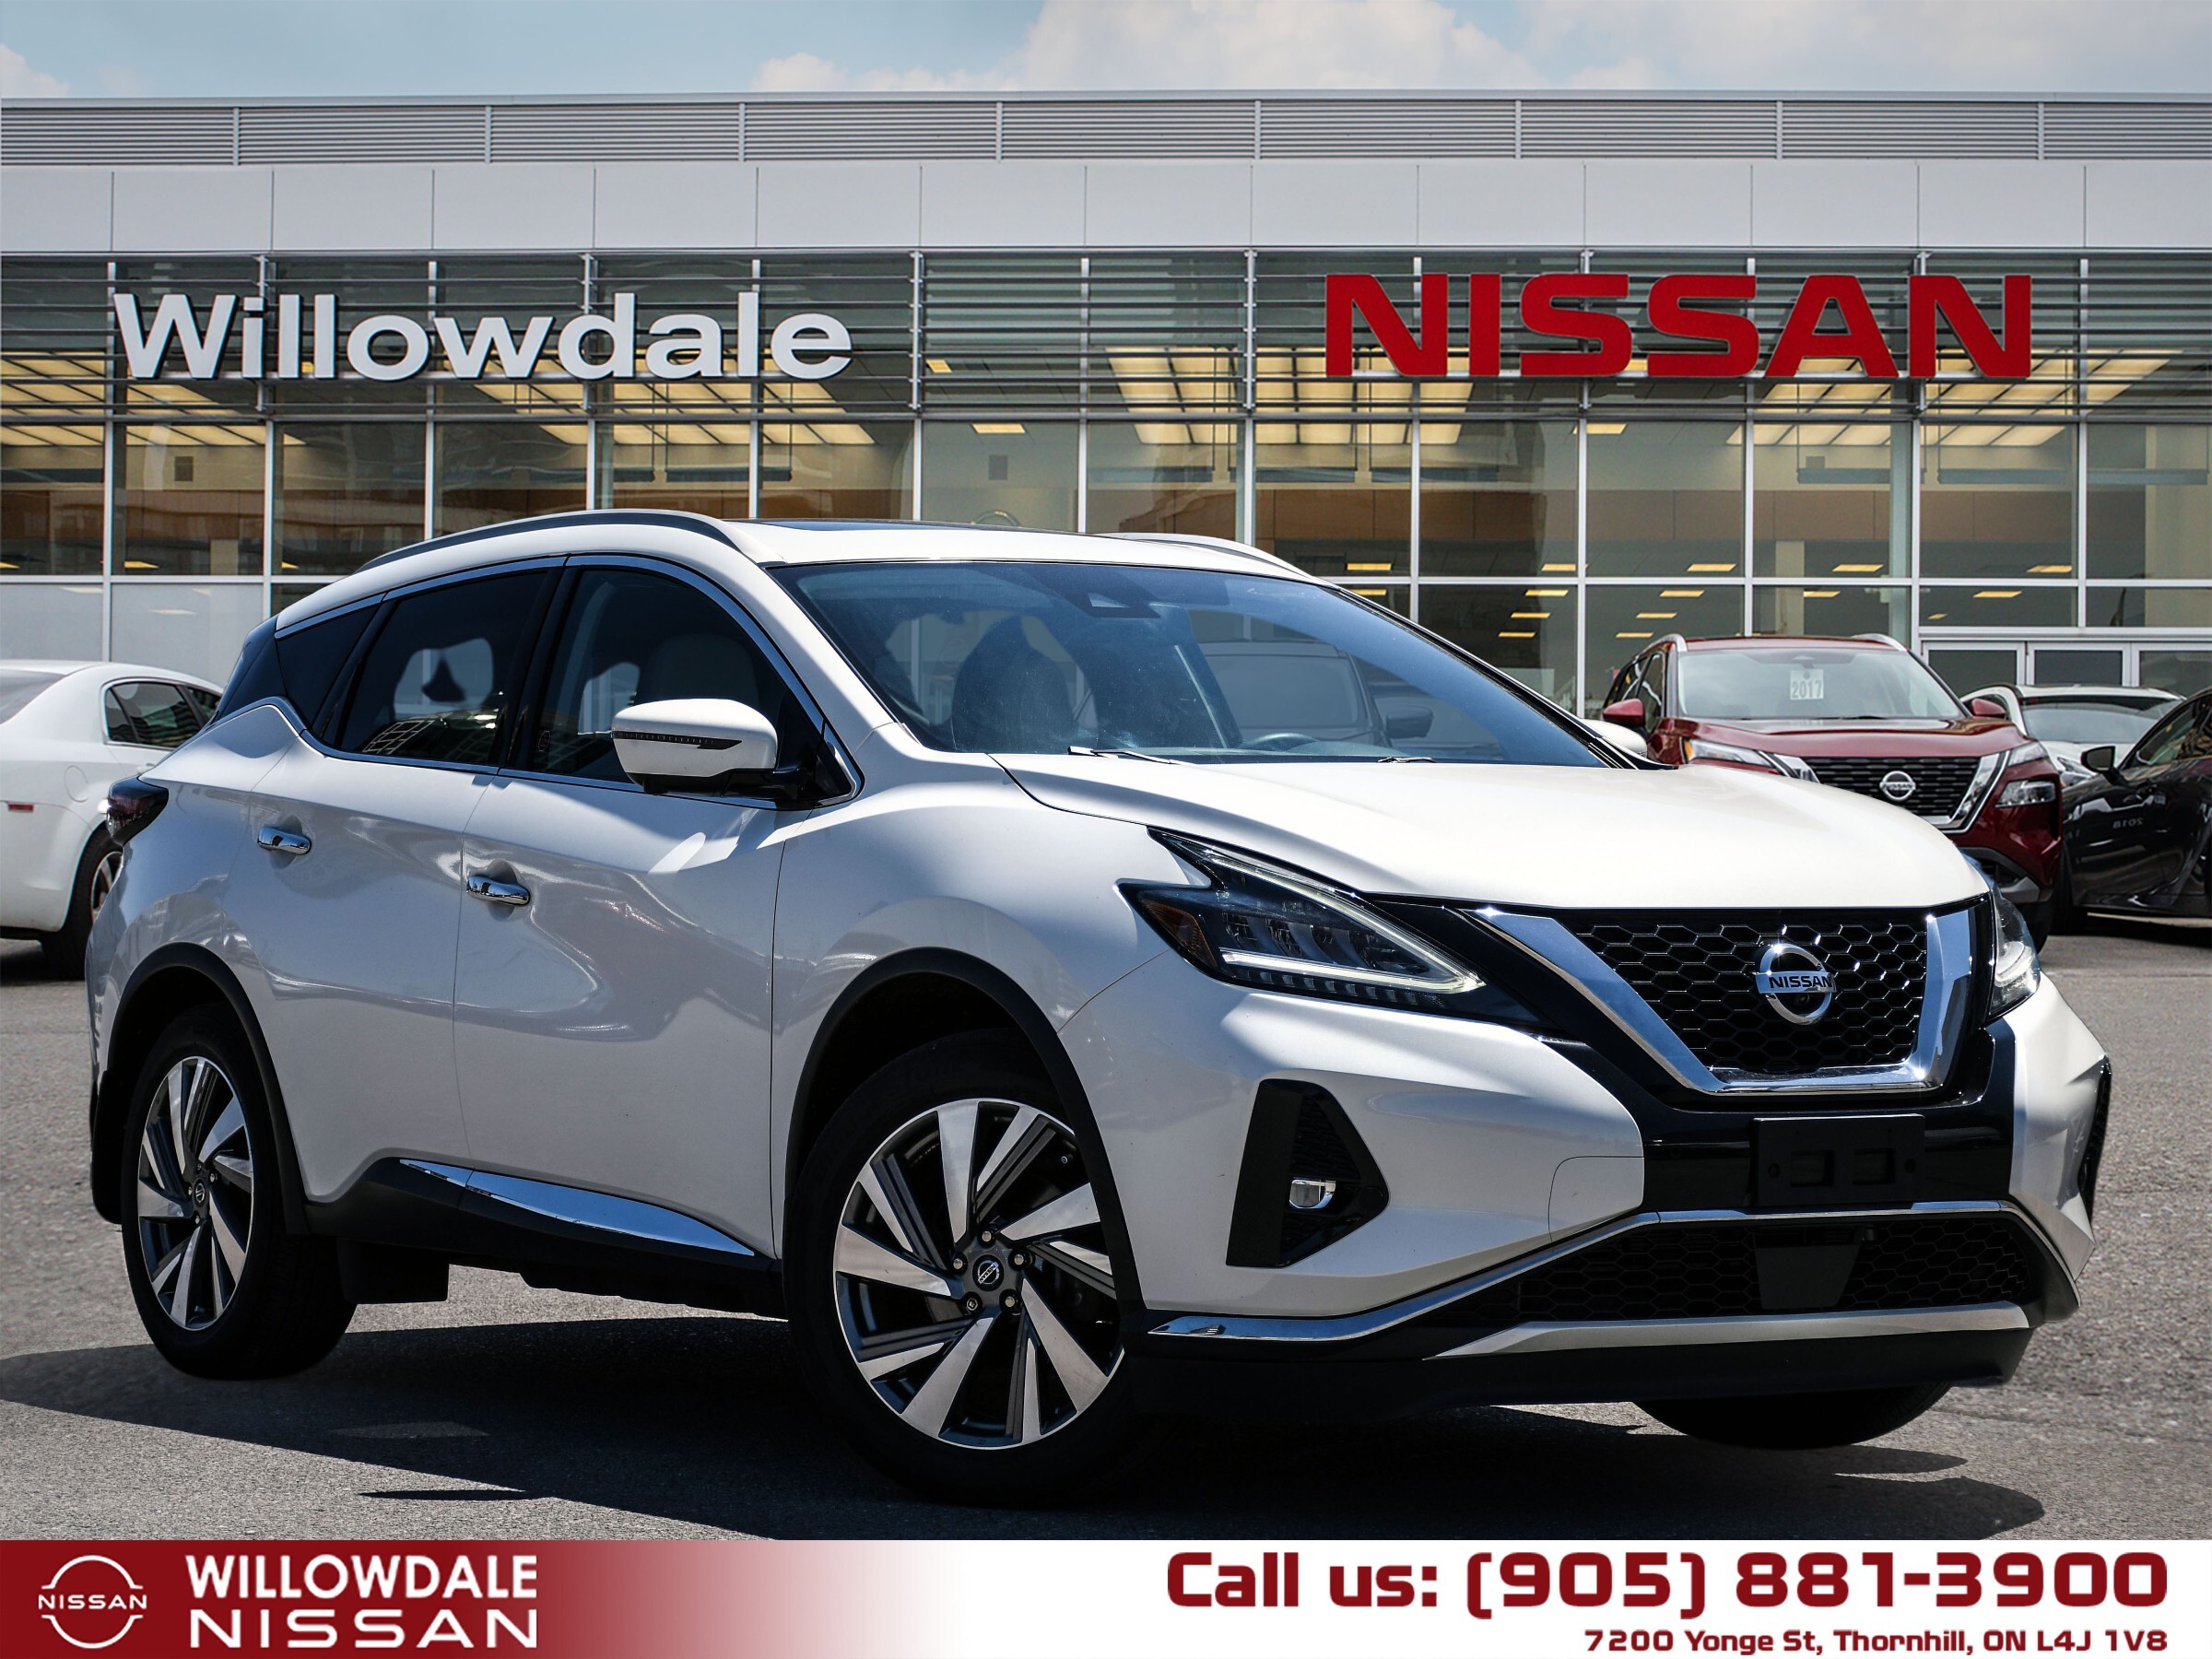 2020 Nissan Murano SL - SALE EVENT MAY 24- MAY 25